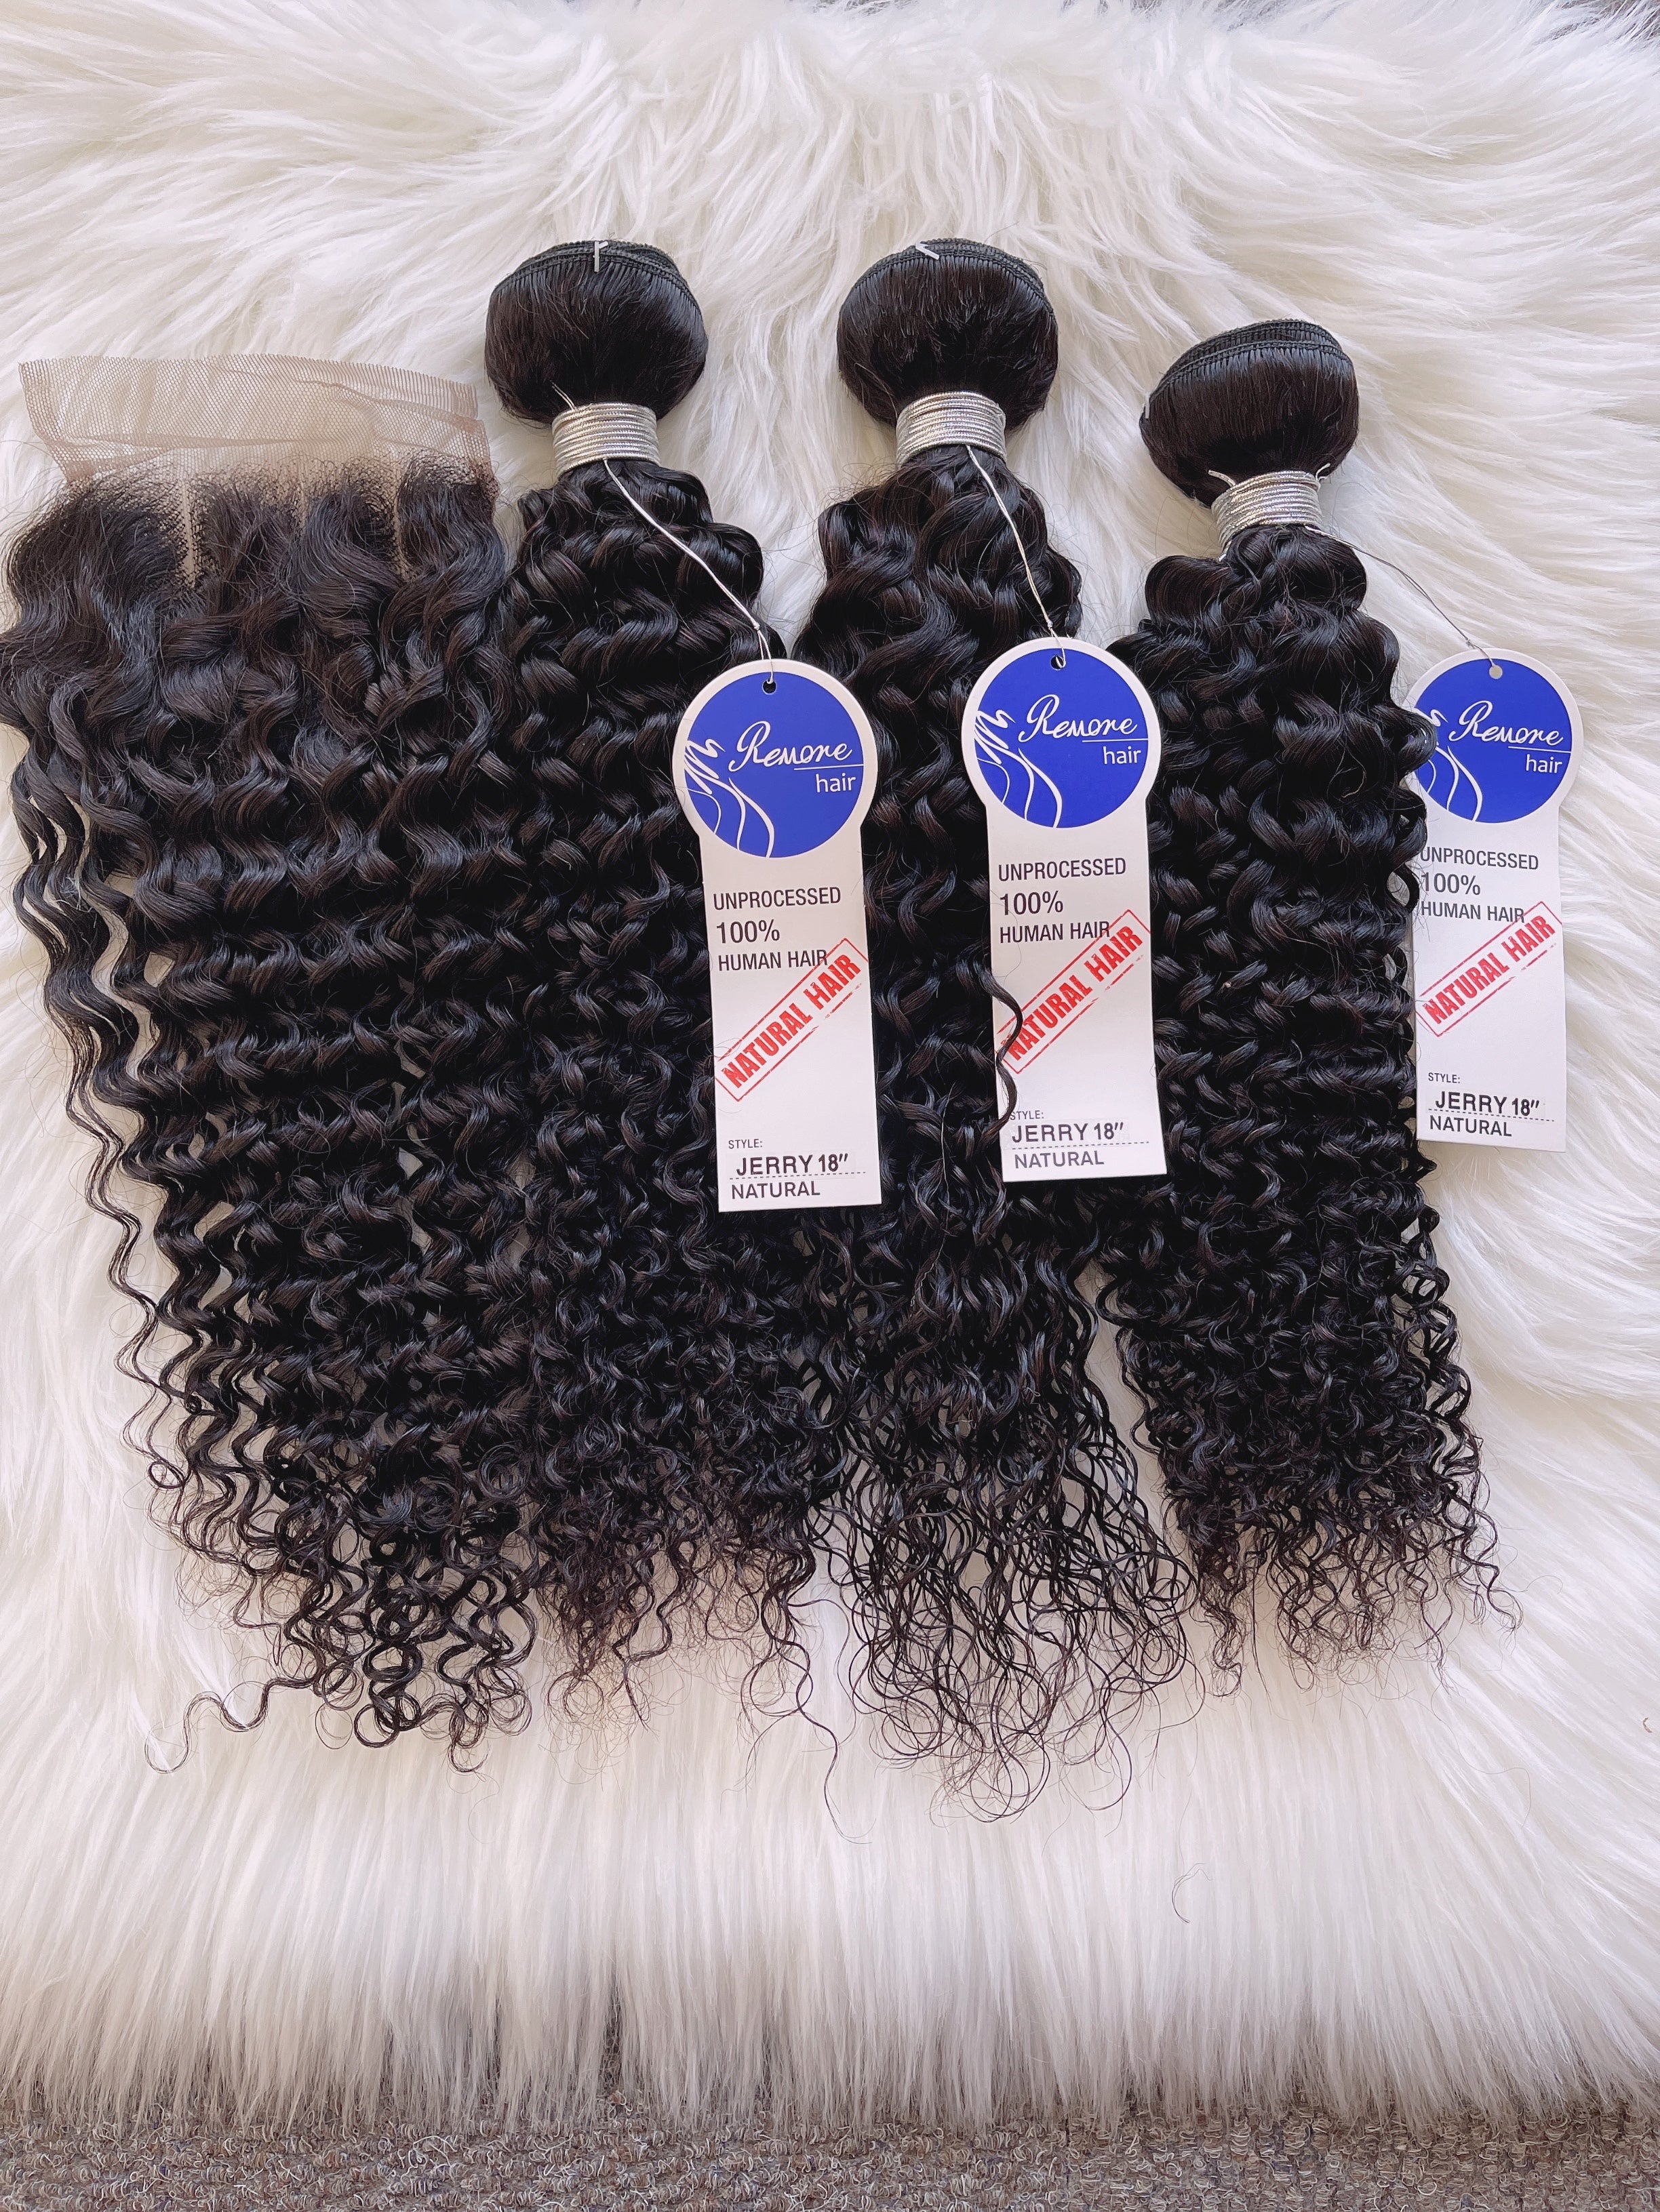 Malaysian Water Curly 3 bundles with 4x4 Closure